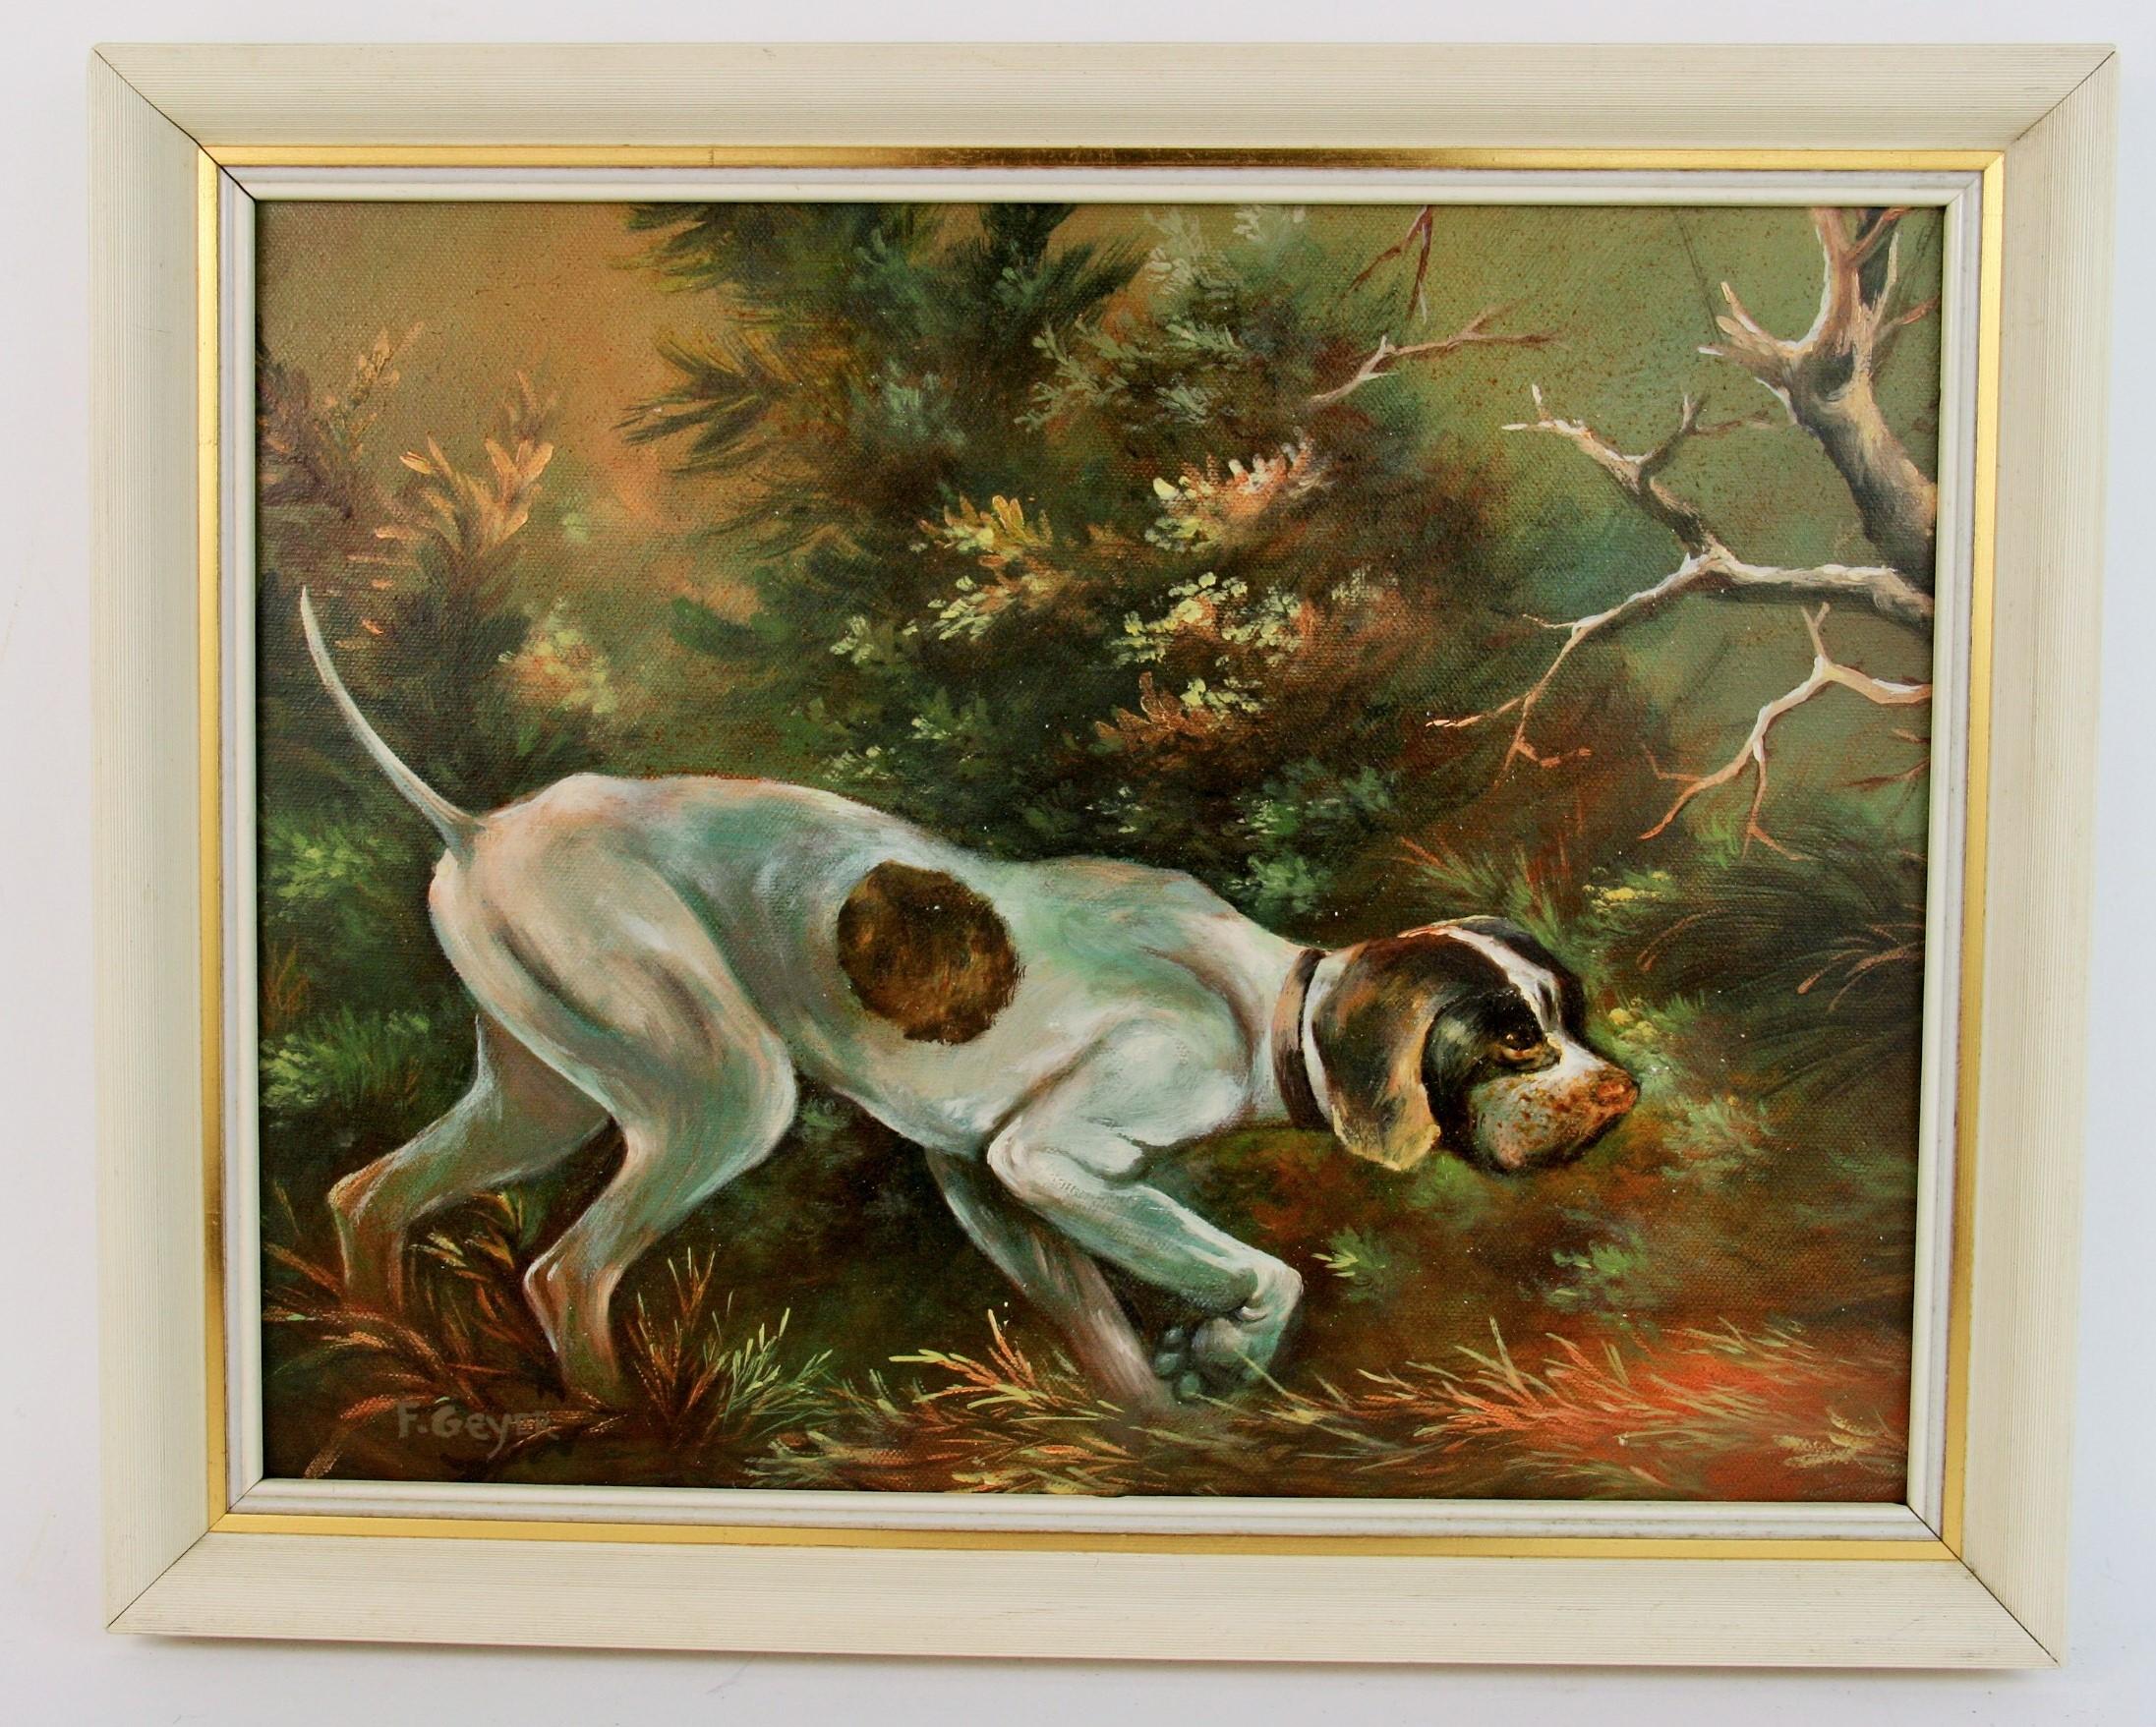 Geyer Animal Painting - Vintage American Pointer Dog Hunting in  Landscape  Oil  Painting 1940's